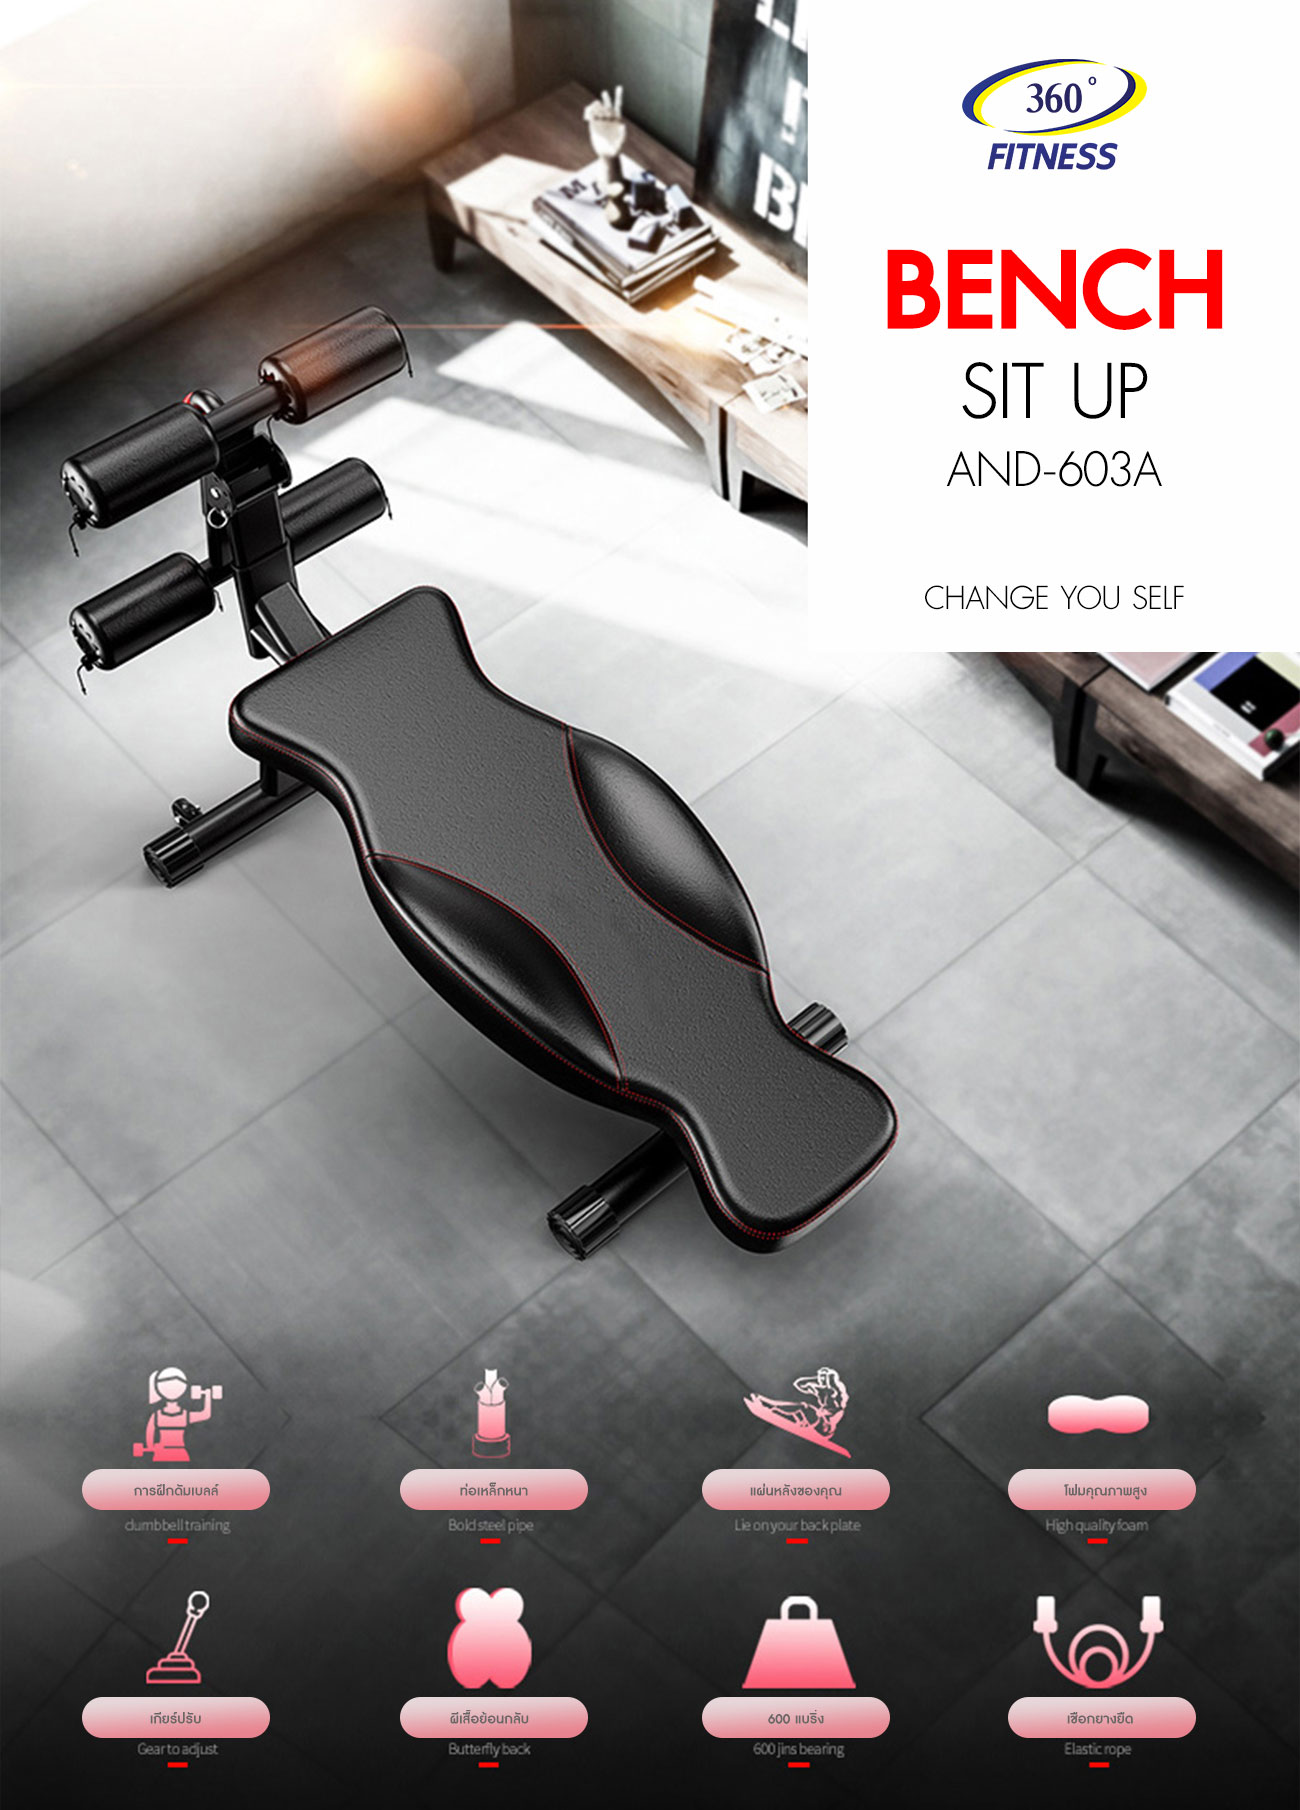 AND-603A sit up bench